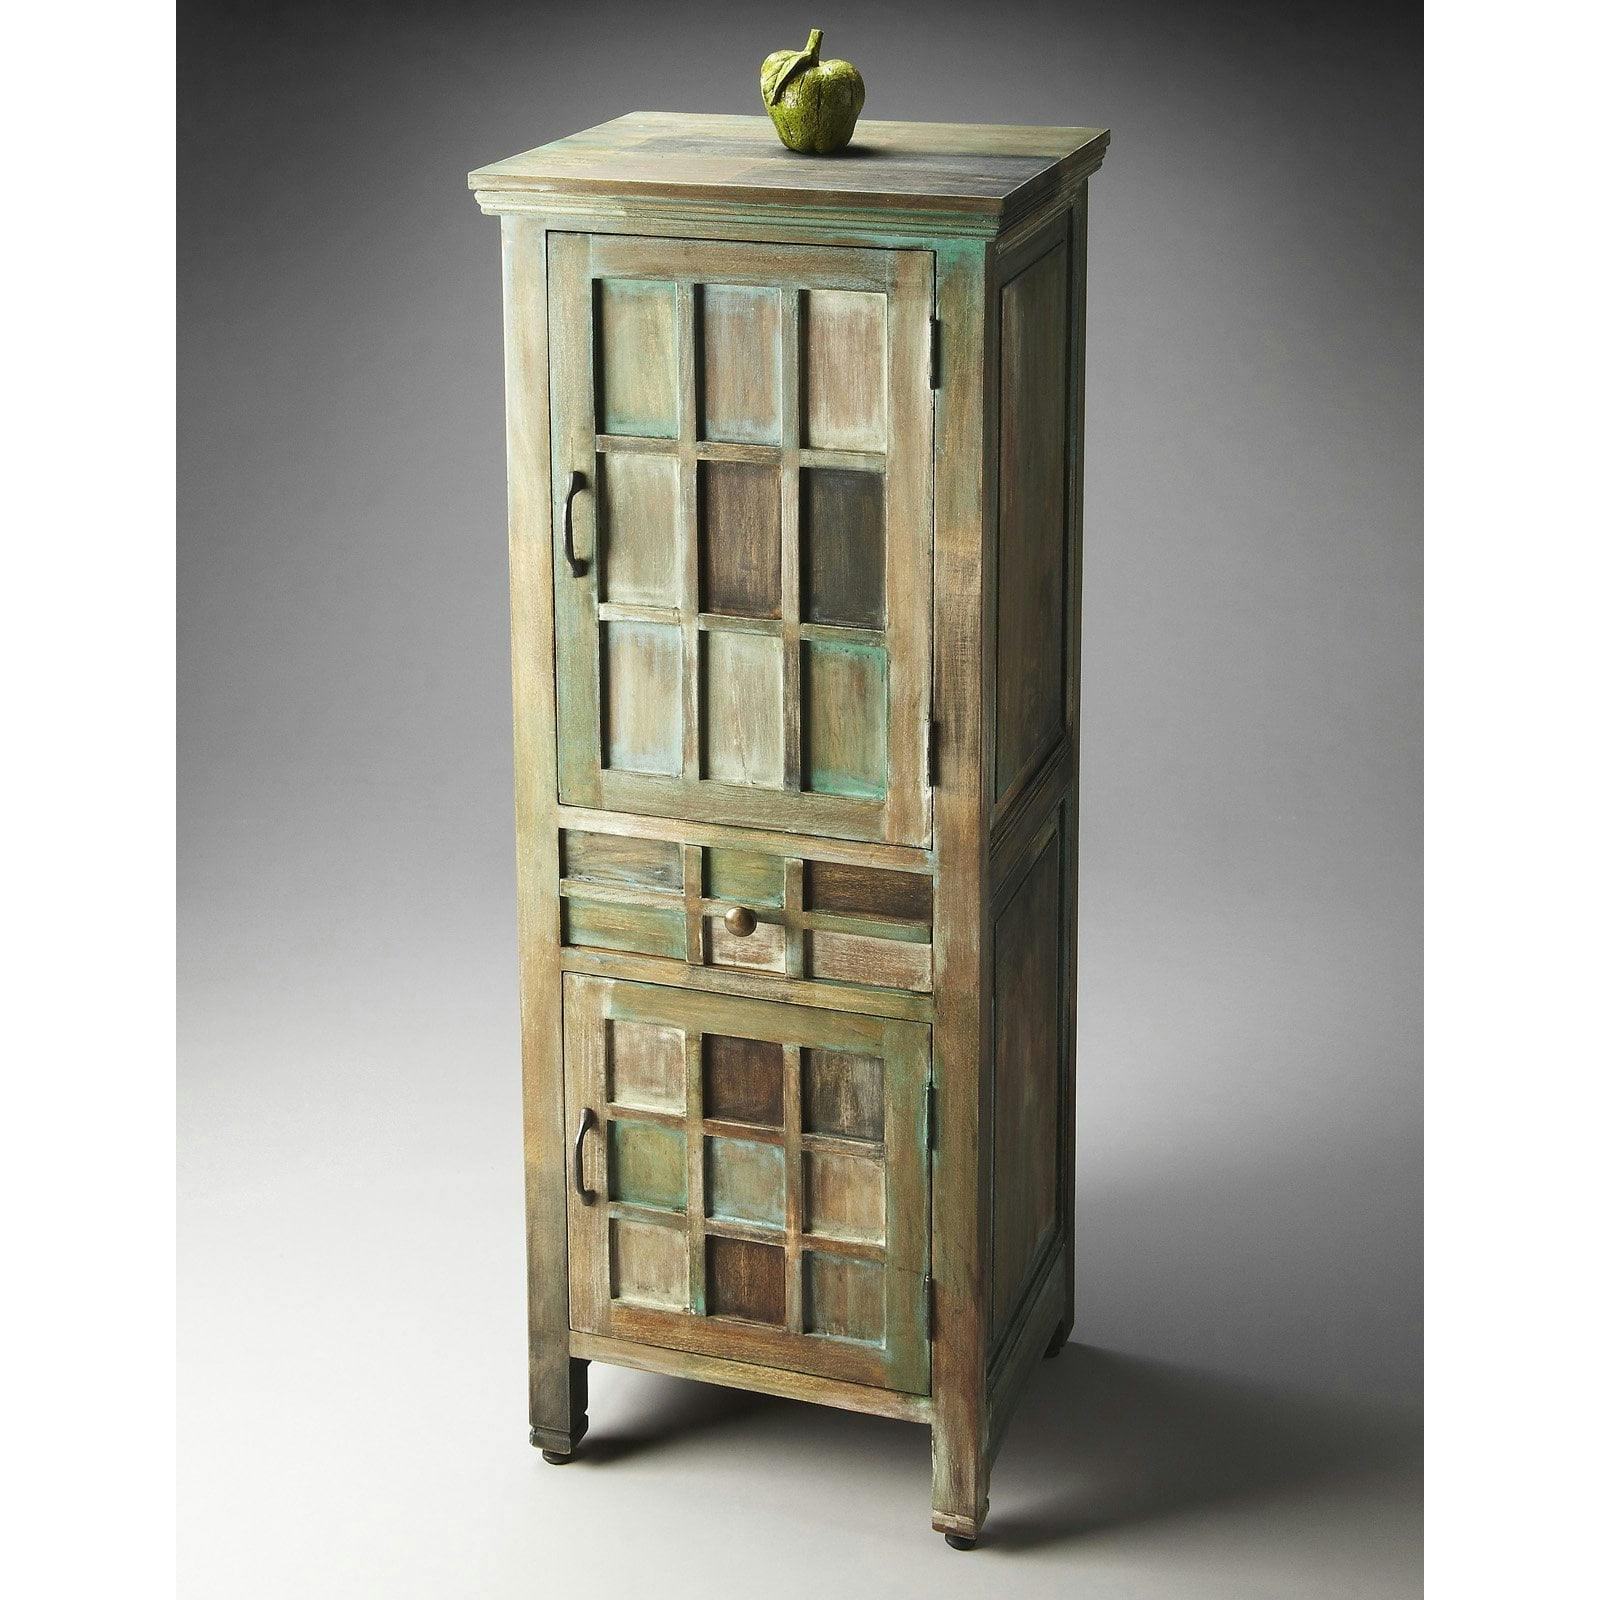 Jodha Artifacts Freestanding Accent Cabinet in Rustic Greens and Browns